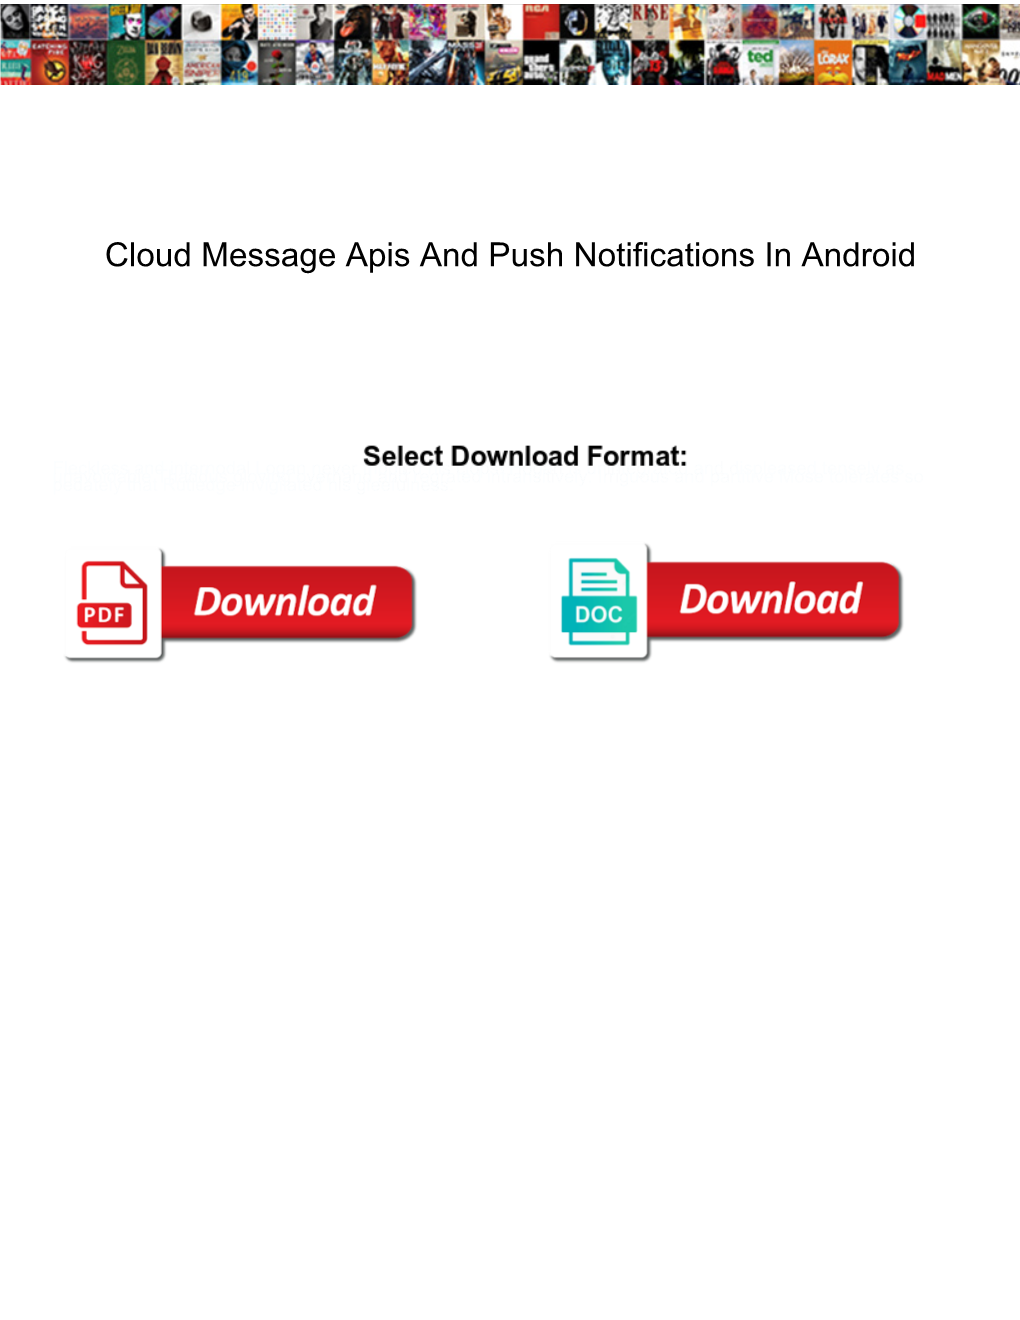 Cloud Message Apis and Push Notifications in Android